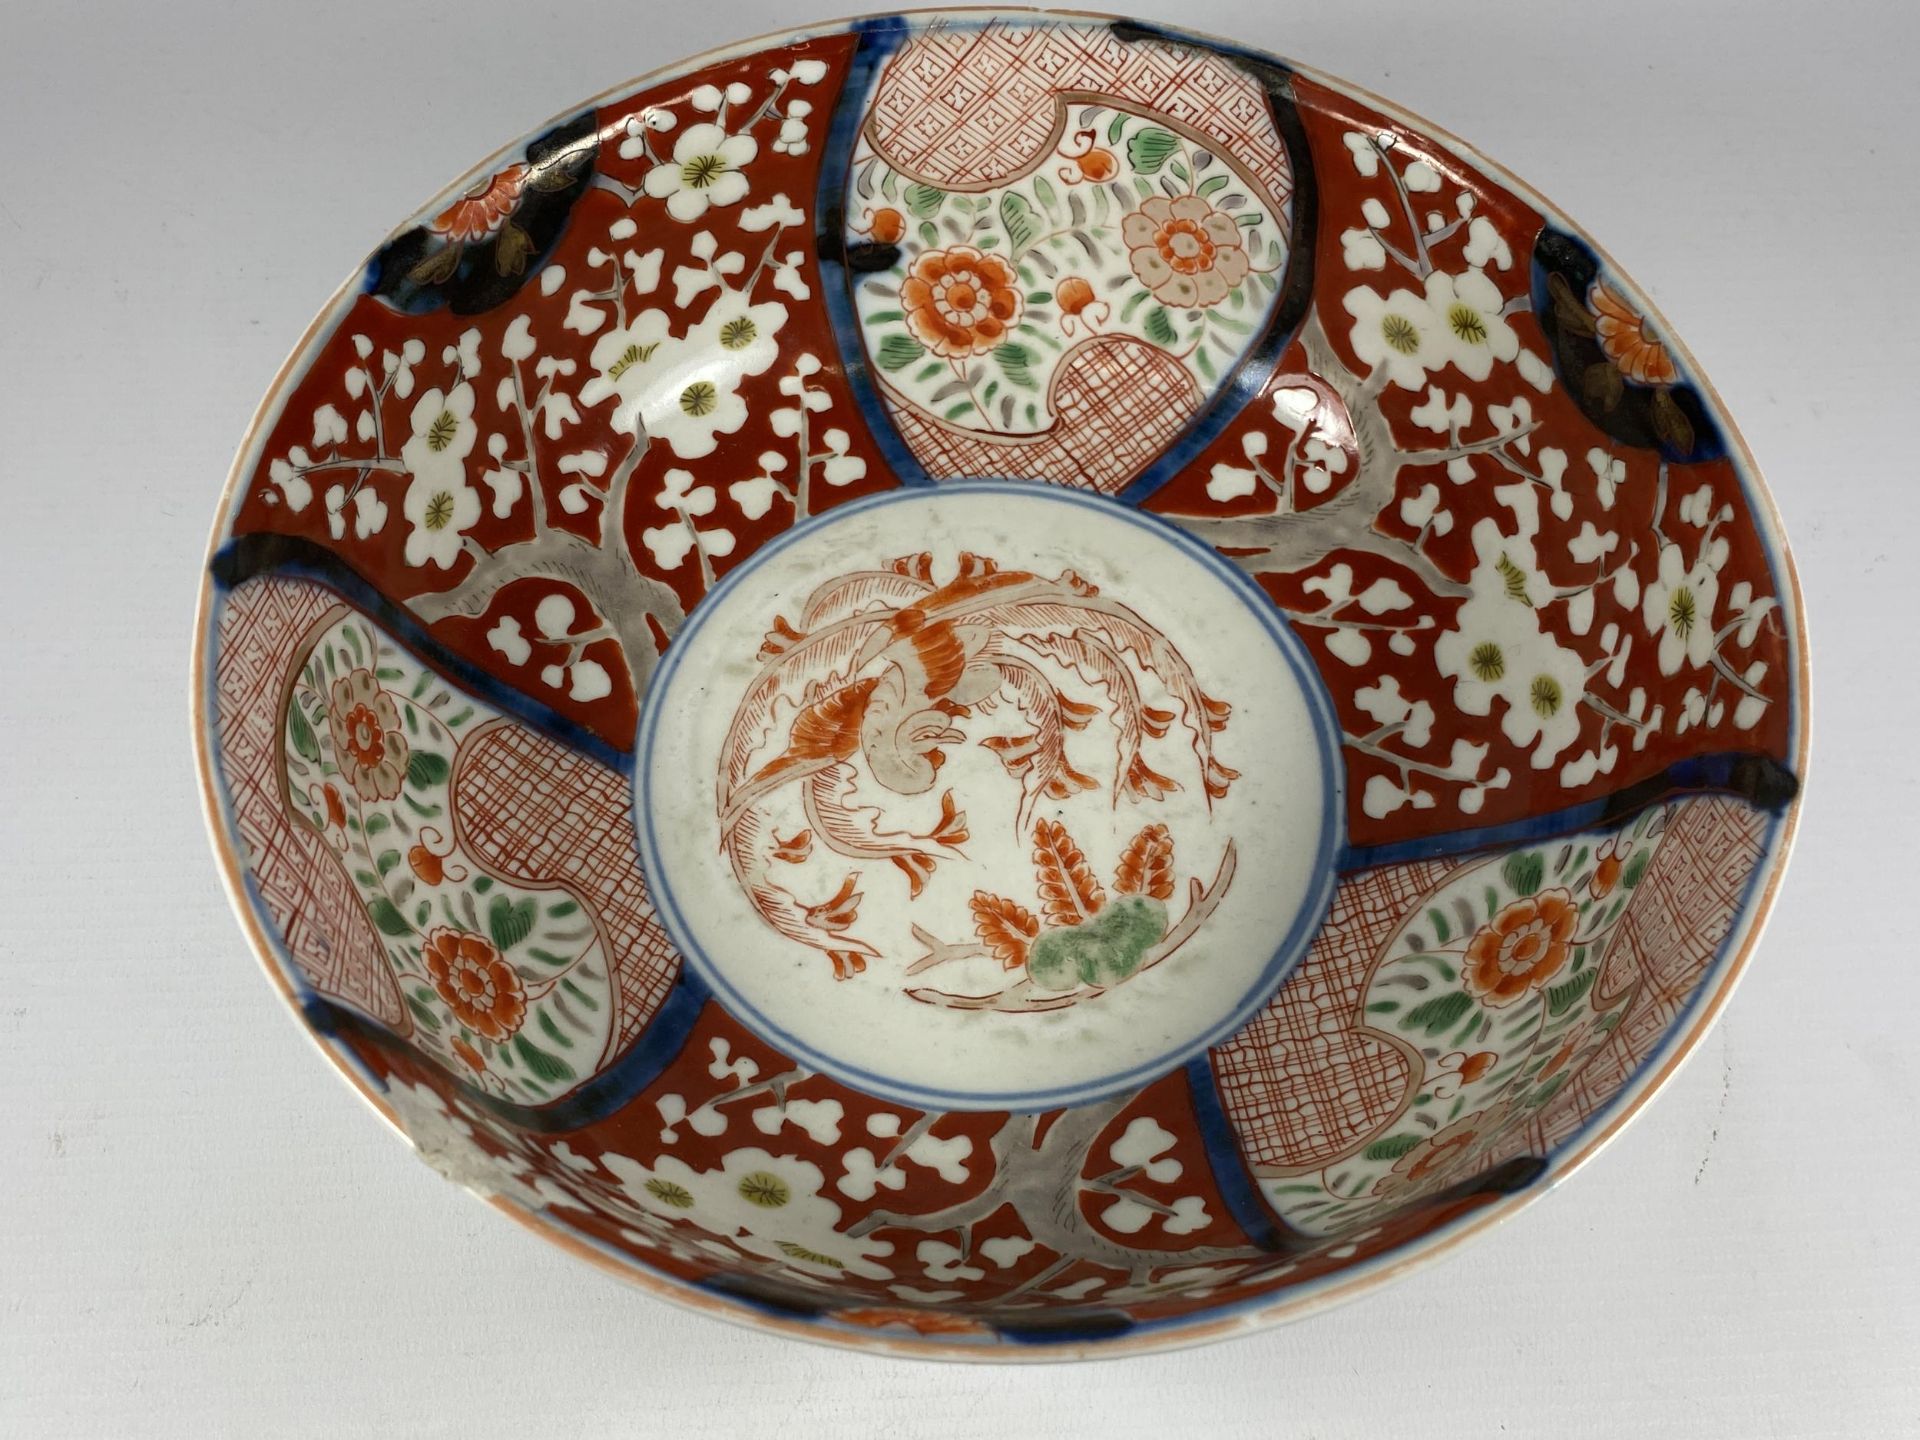 A LARGE JAPANESE MEIJI PERIOD (1868-1912) IMARI FRUIT BOWL WITH RED ENAMELLED FLORAL DESIGN, - Image 2 of 8